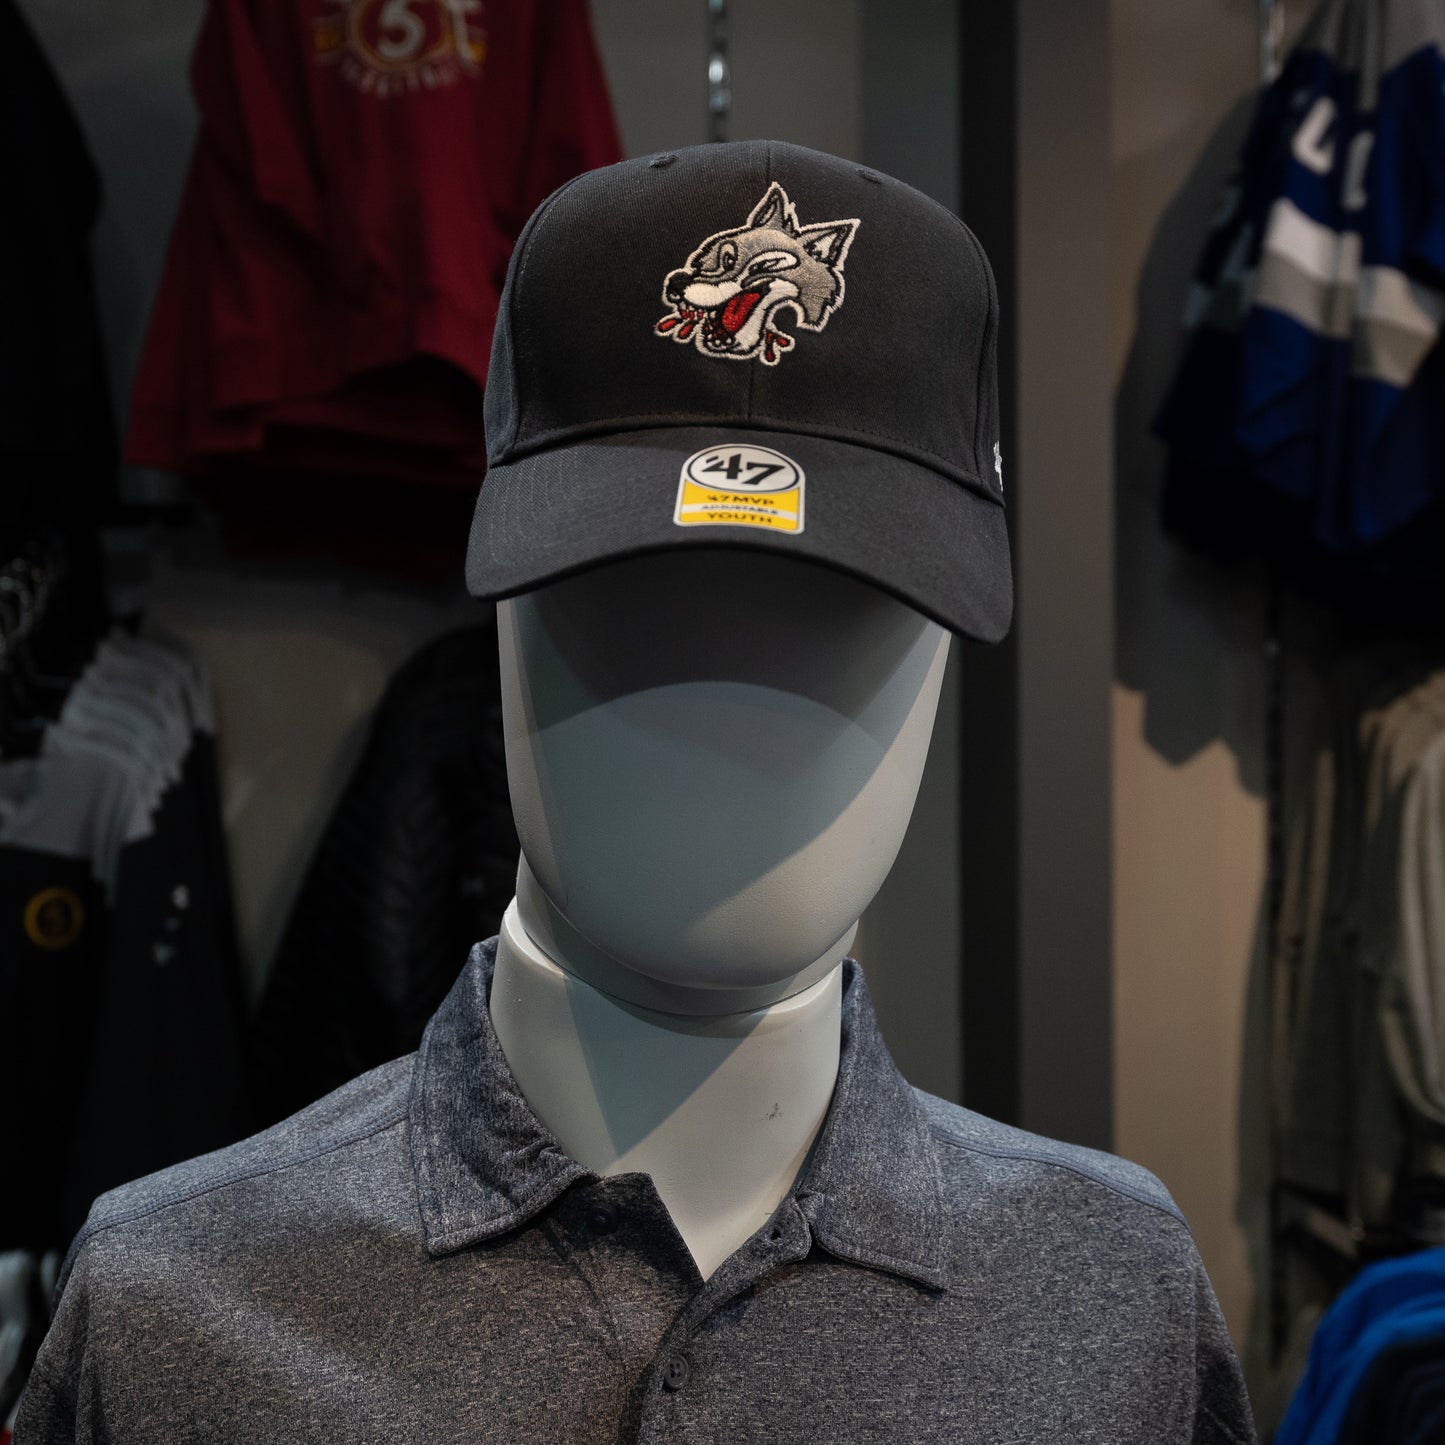 Wolves '47 Youth Adjustable Hat